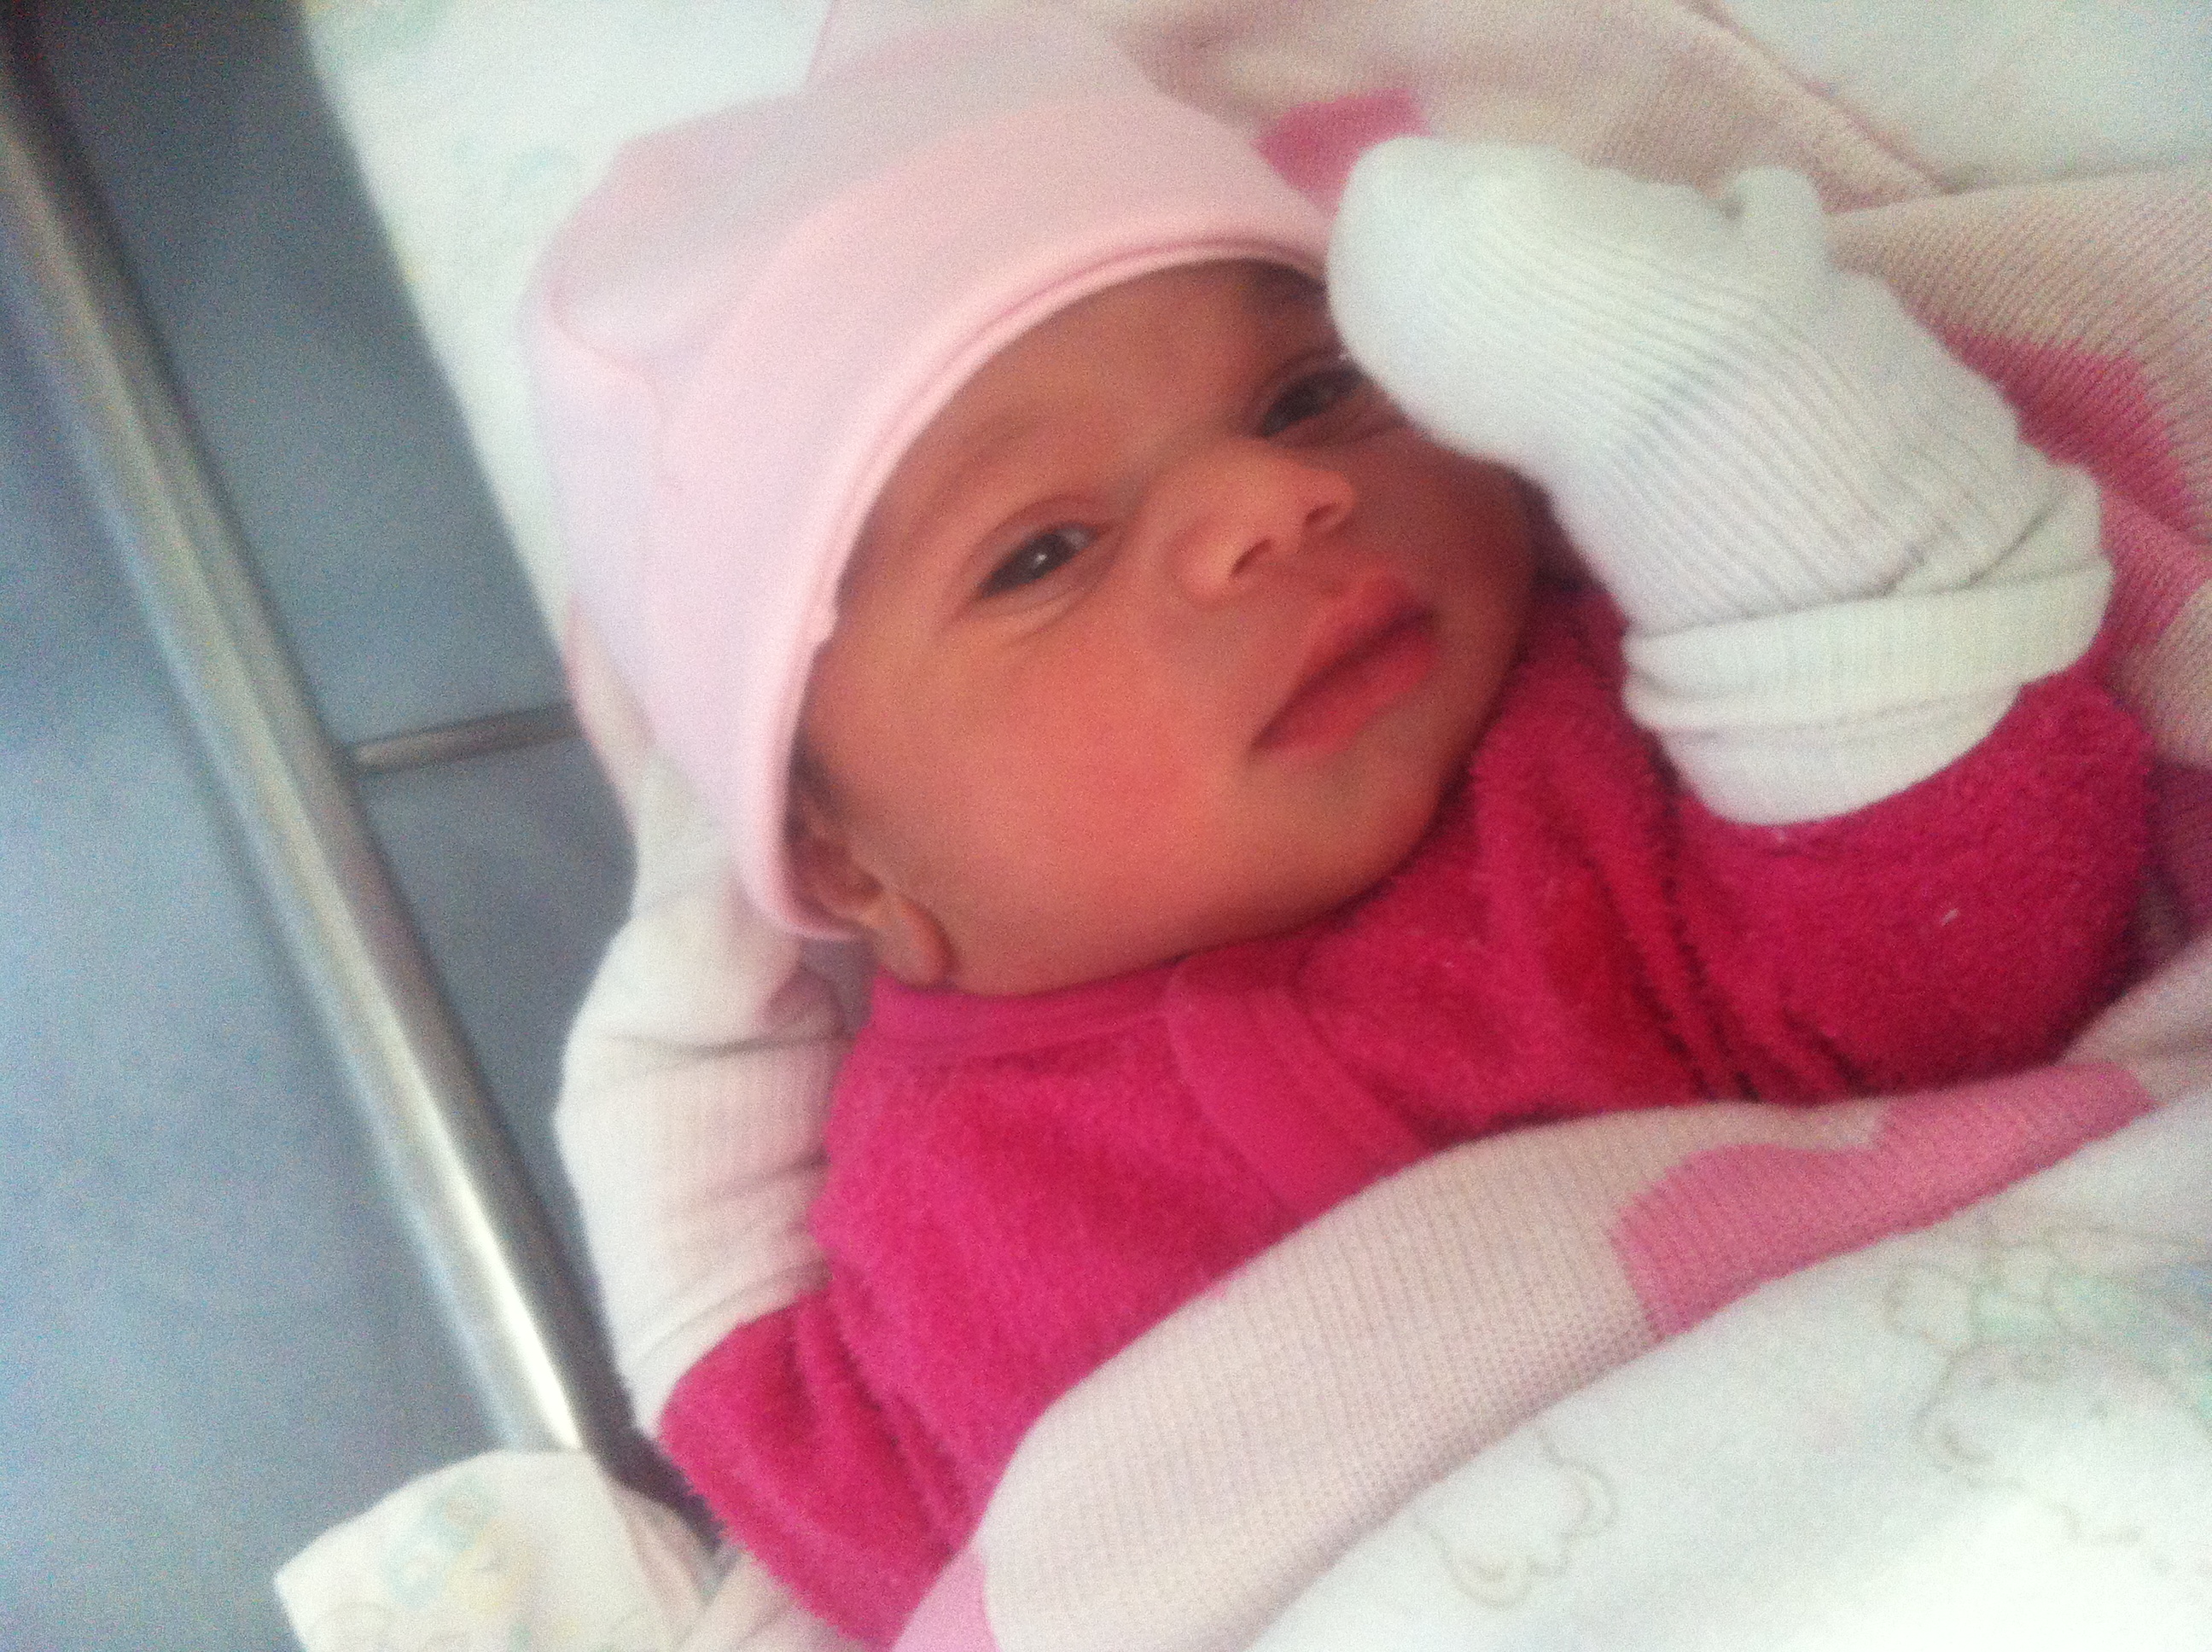 Maalii (pronounced marley) Marie Munns born 3:35pm on The 10th December 2012 weighing 7 pound 5 &amp; 49cm long. - photo